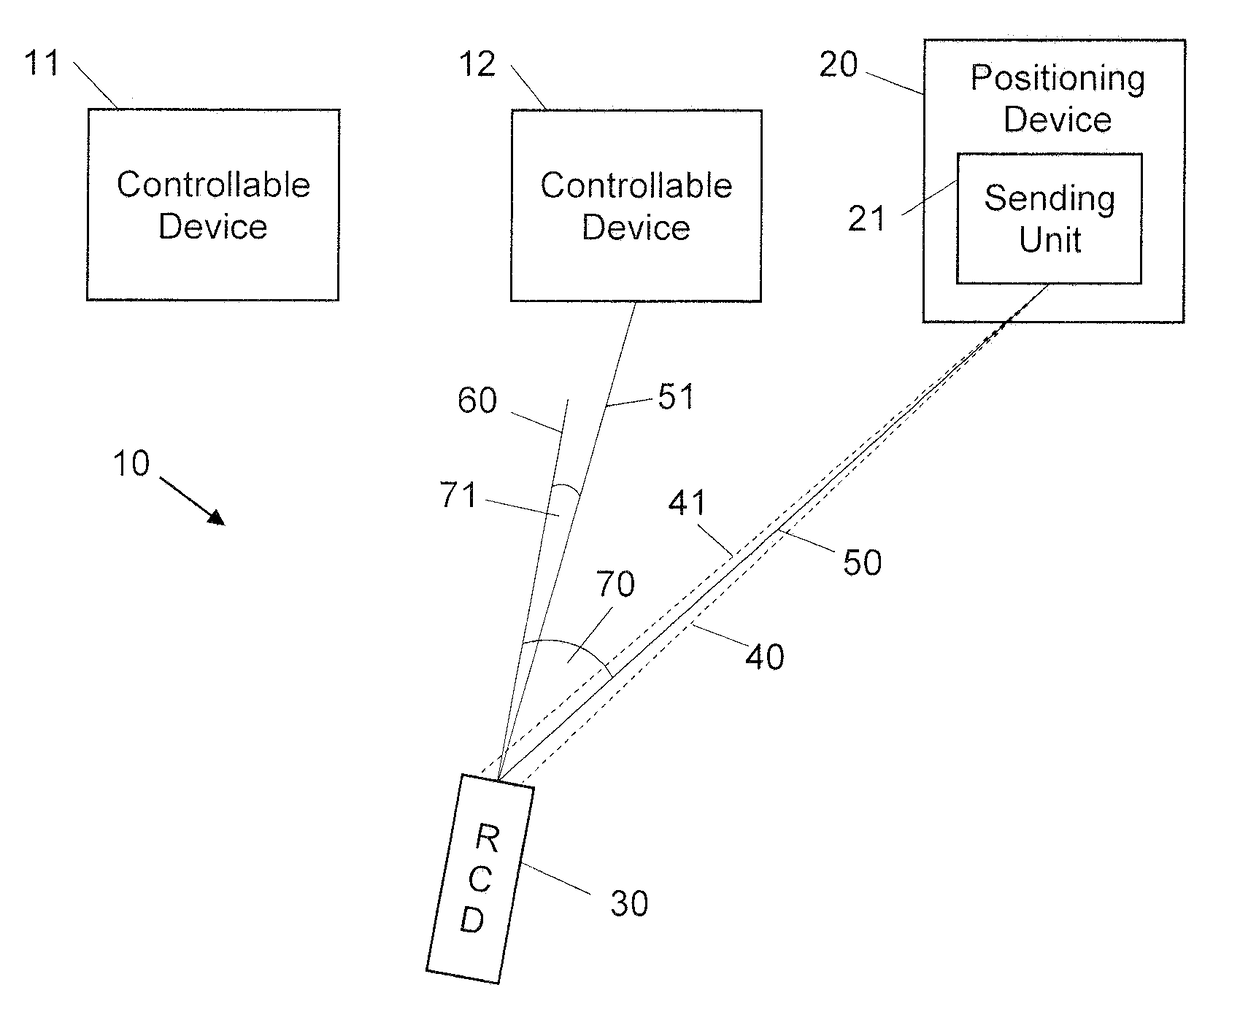 Remote controlling a plurality of controllable devices